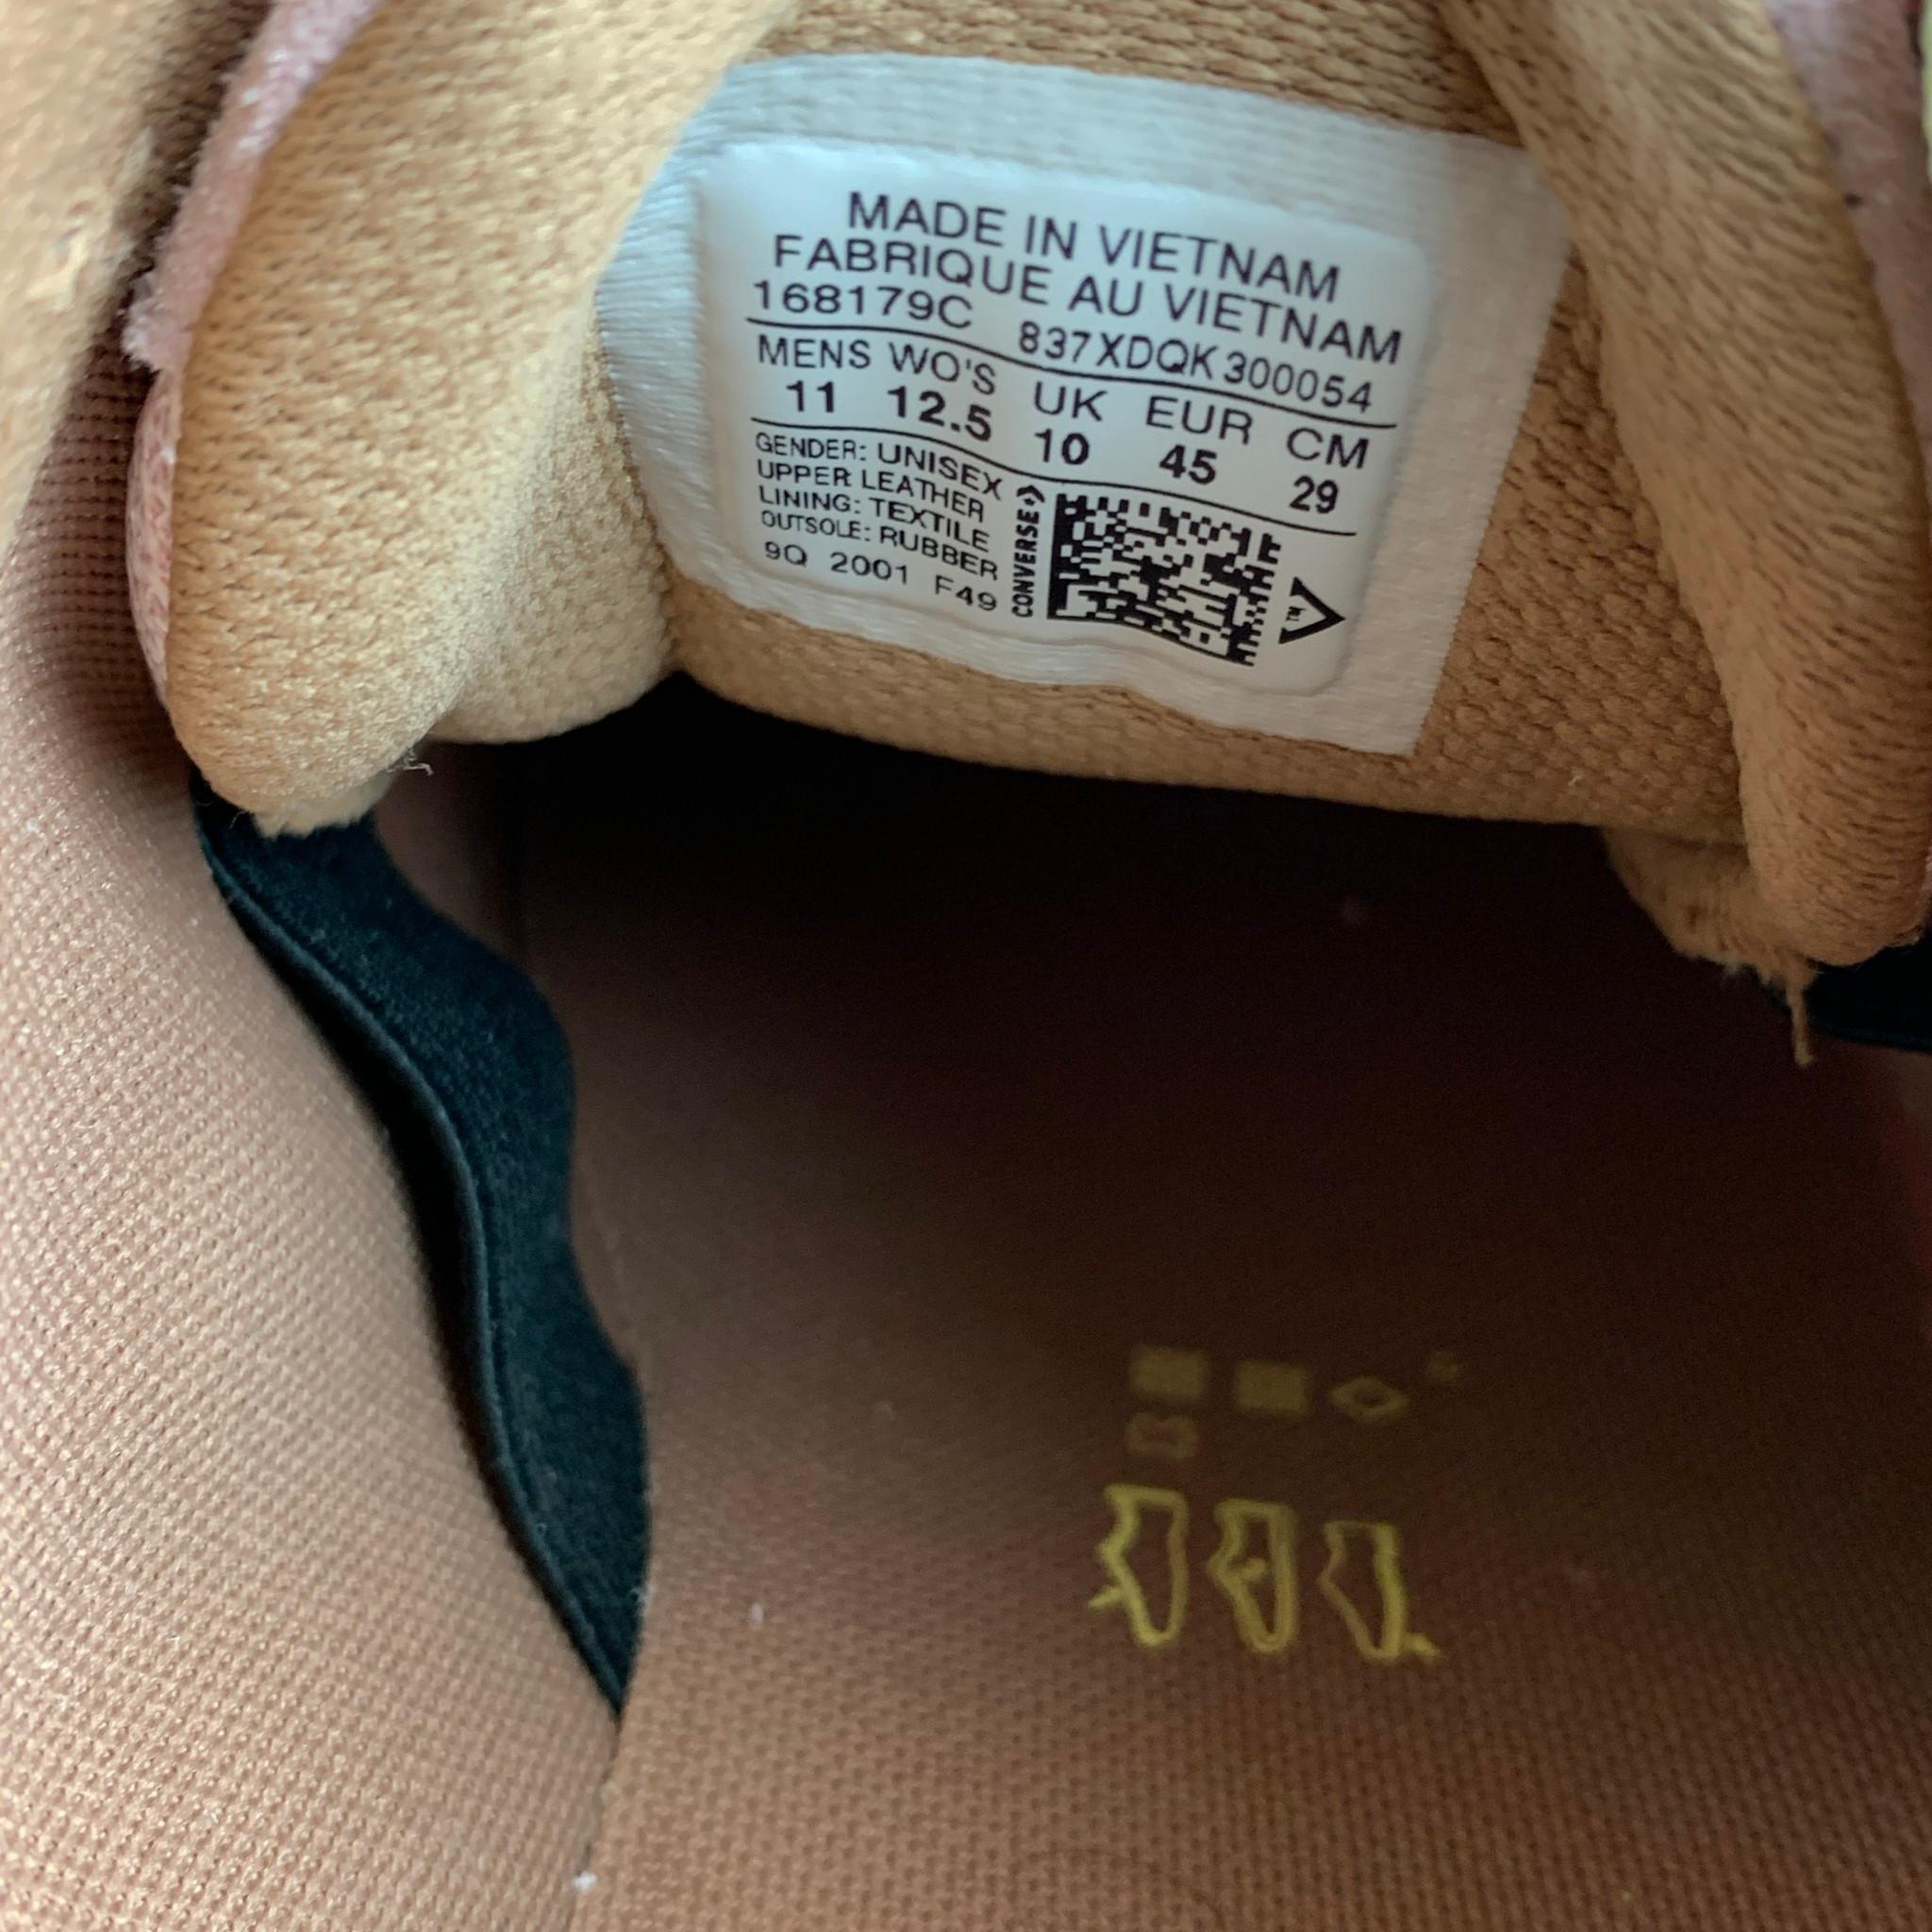 CONVERSE x GOLF Le Fleur Gianno Size 11 Tan Pink Two Toned Leather Sneakers In New Condition In San Francisco, CA